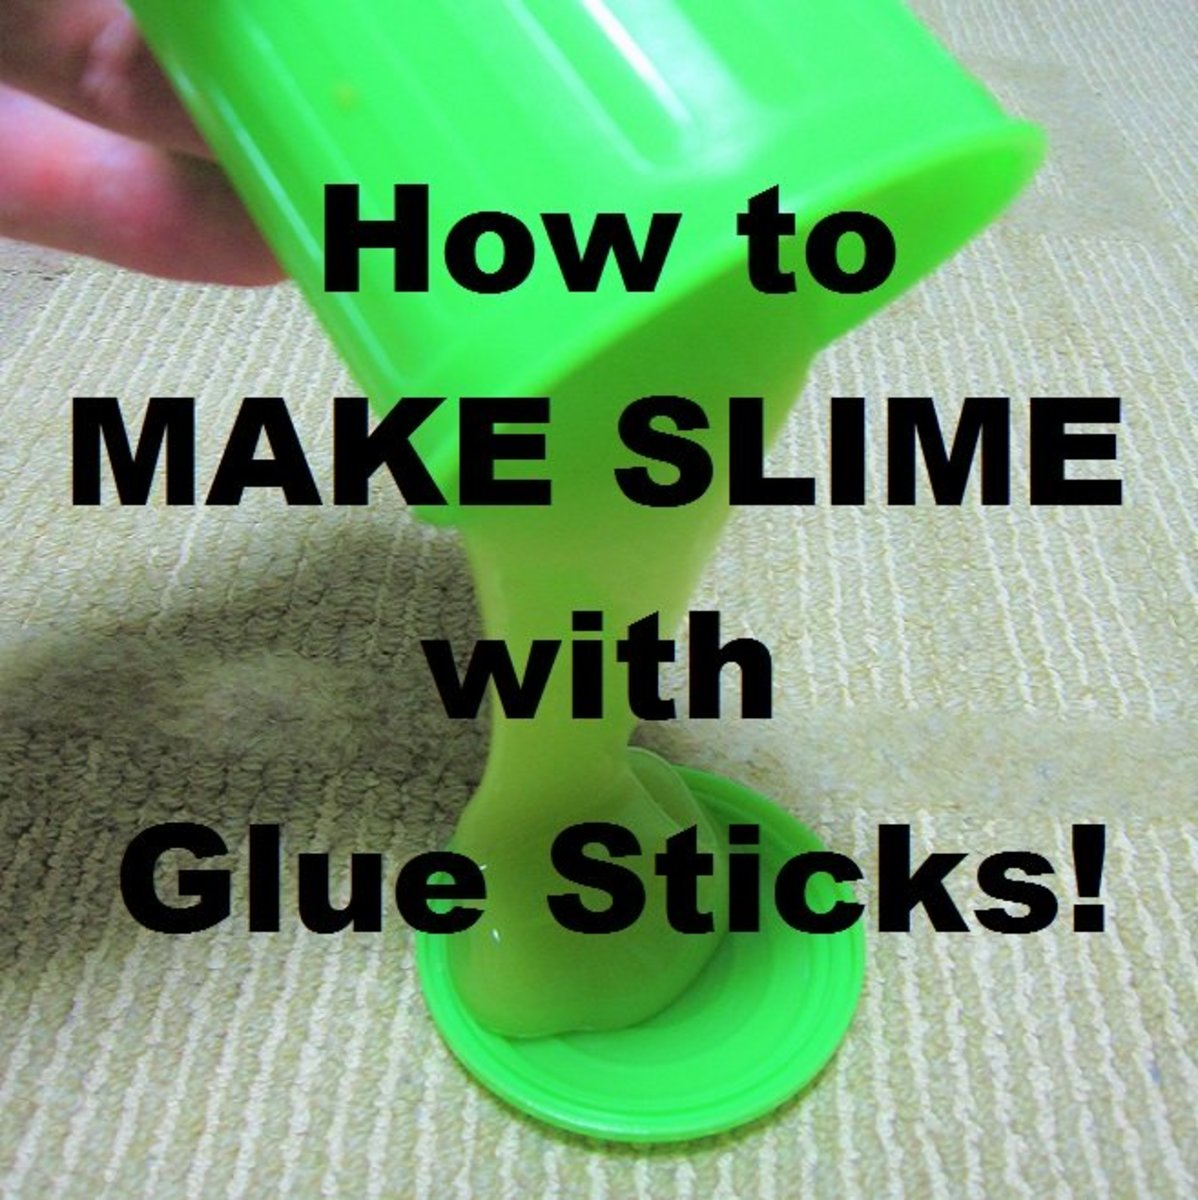 Slime Safety: How To Make Slime Without Worry